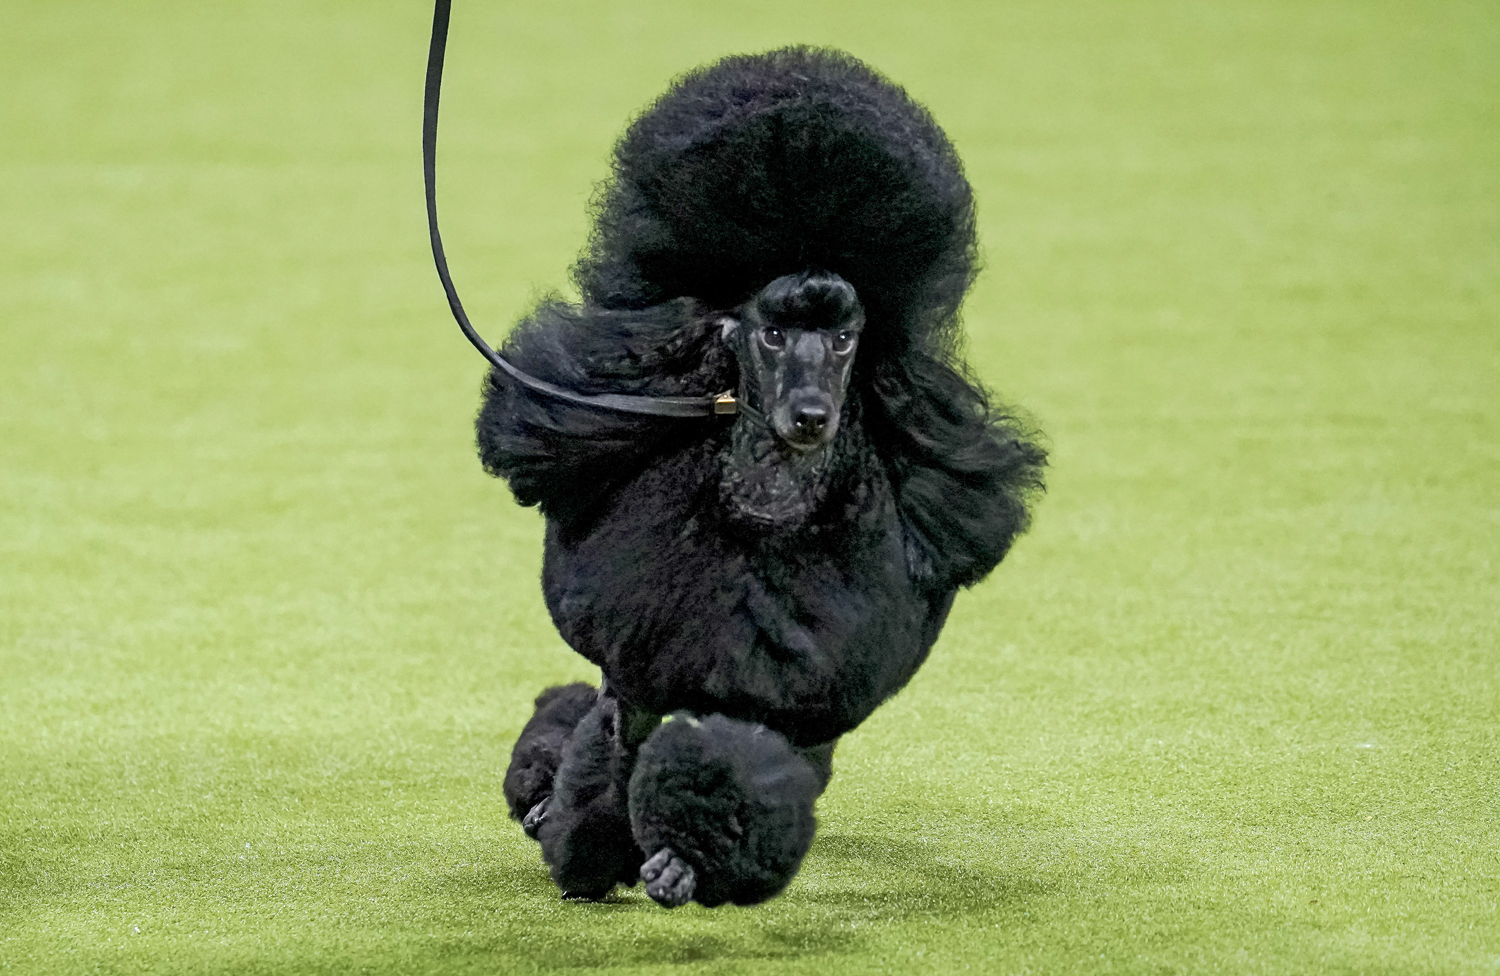 A groomed black poodle runs on a green carpet.